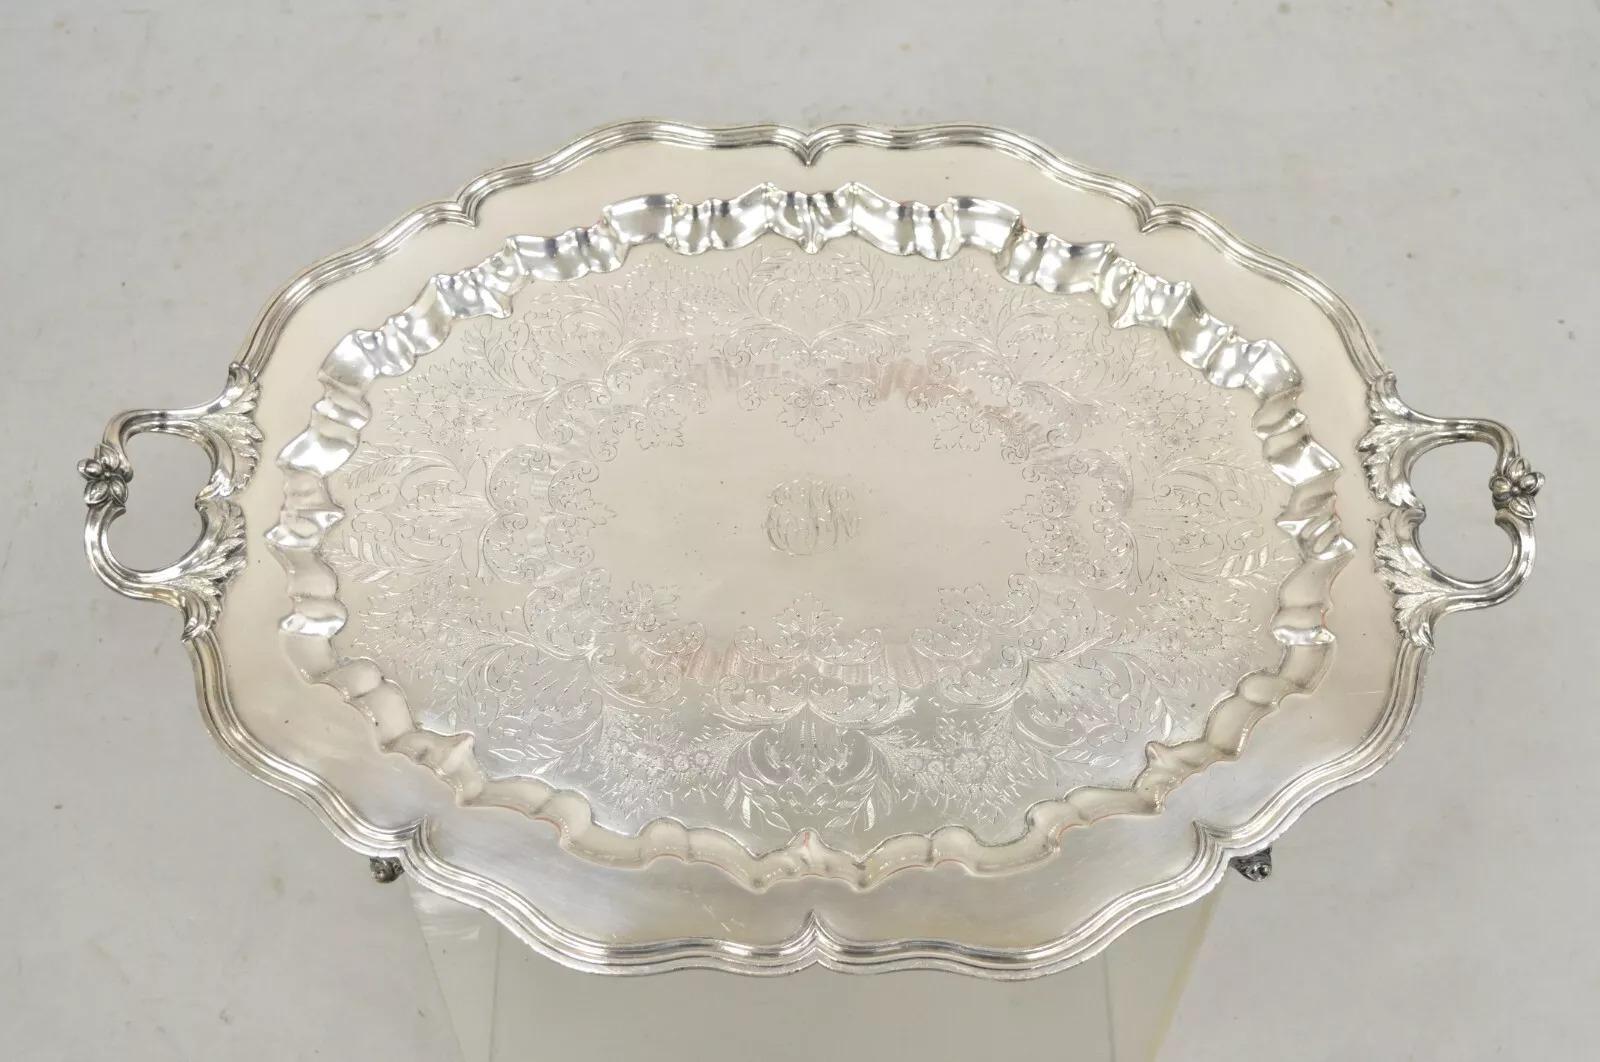 Antique Victorian English Sheffield Silver Plated Oval Scalloped Serving Platter Tray. Monogramme illisible au centre. Circa Late 20th Century. Mesures :  2